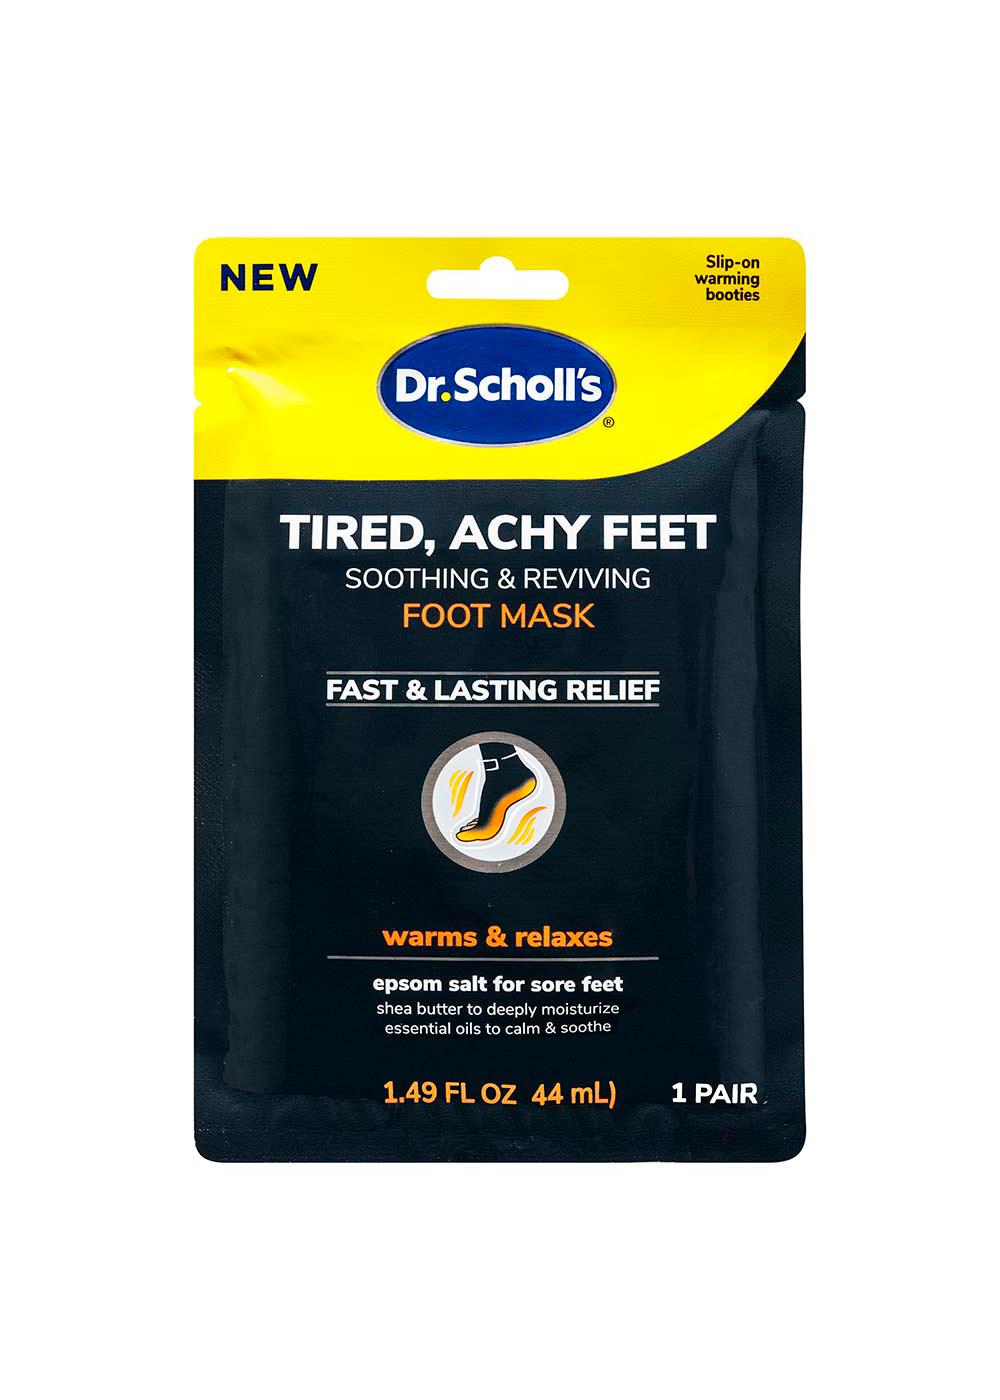 Dr. Scholl's Tired Achy Feet Soothing & Reviving Foot Mask; image 1 of 2